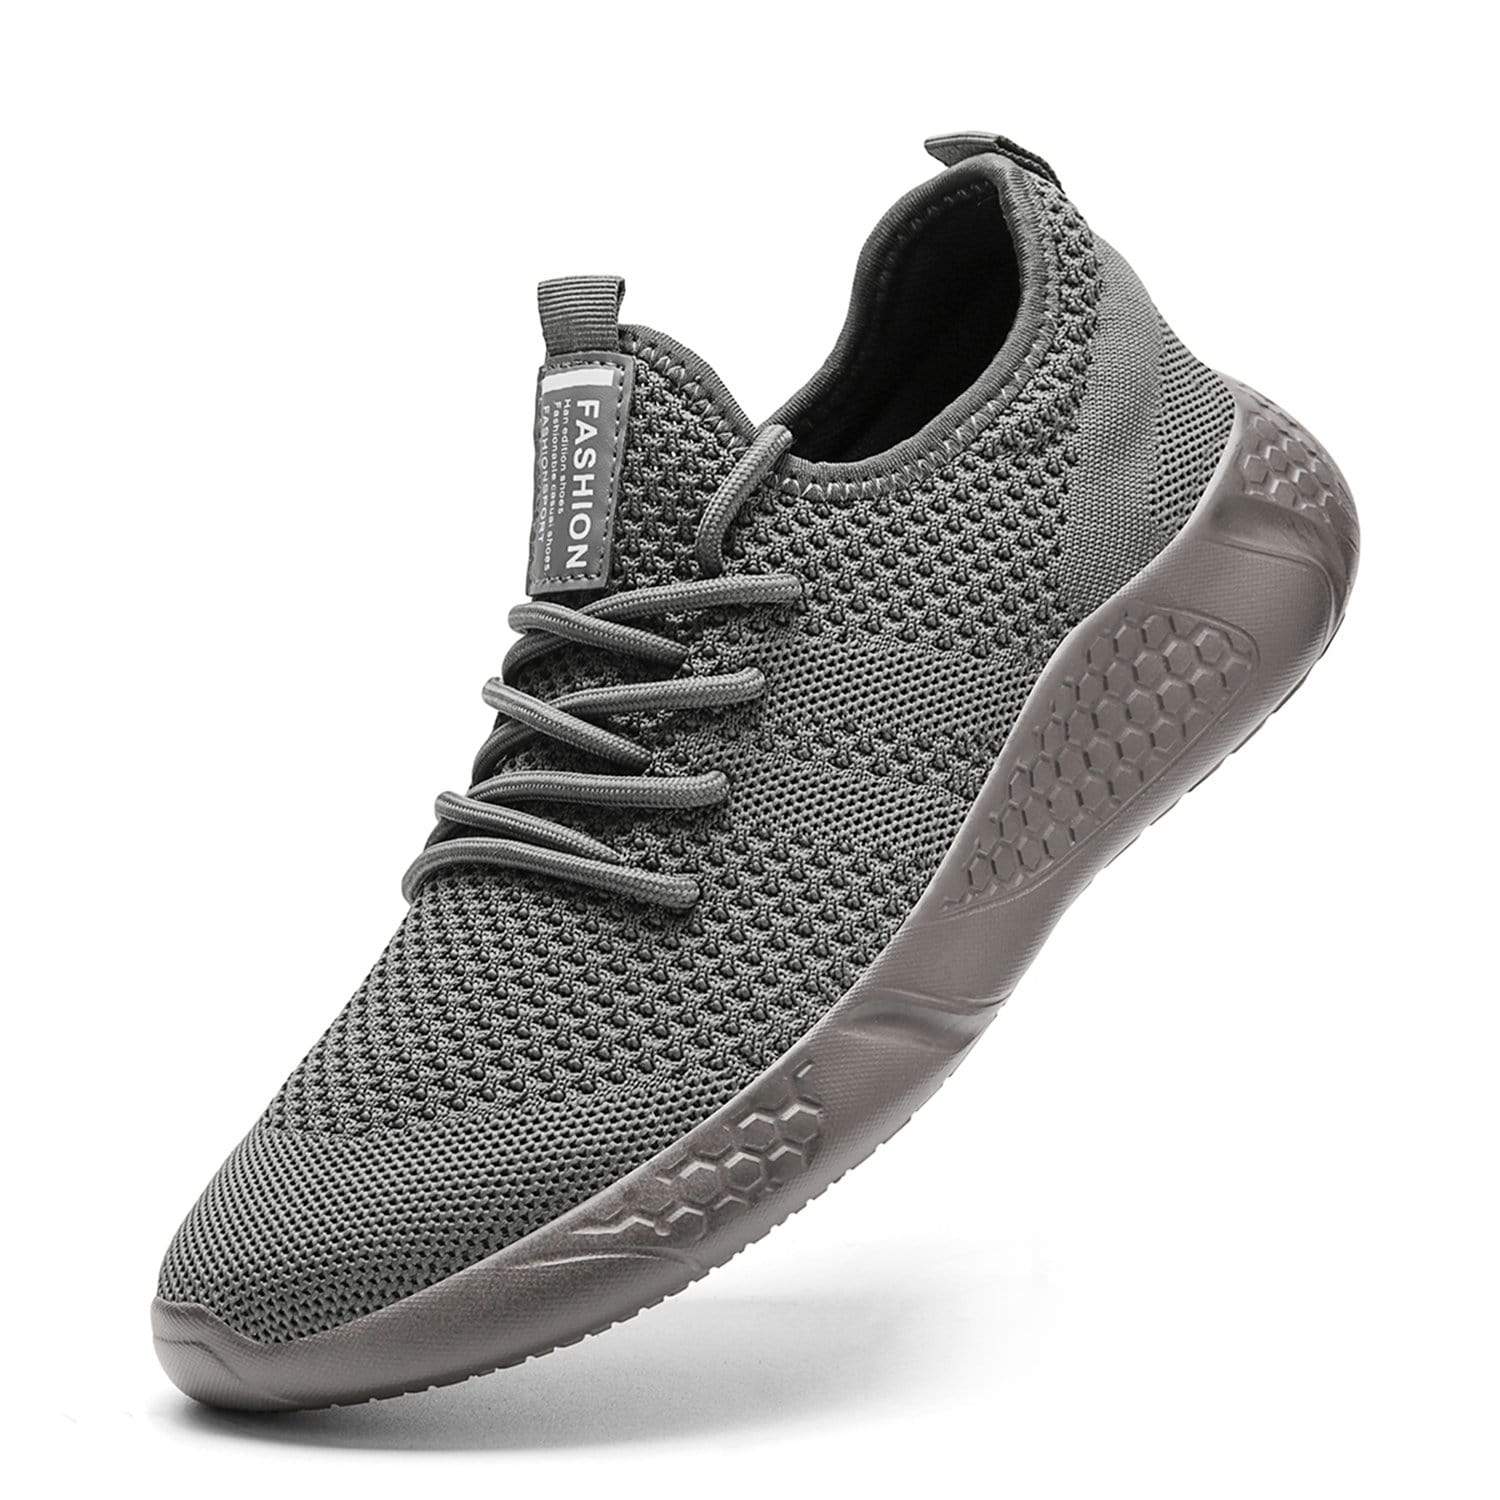 Damyuan grey / 39 Mens Women's Trainers Running Shoes Gym Sport Fitness Sneakers